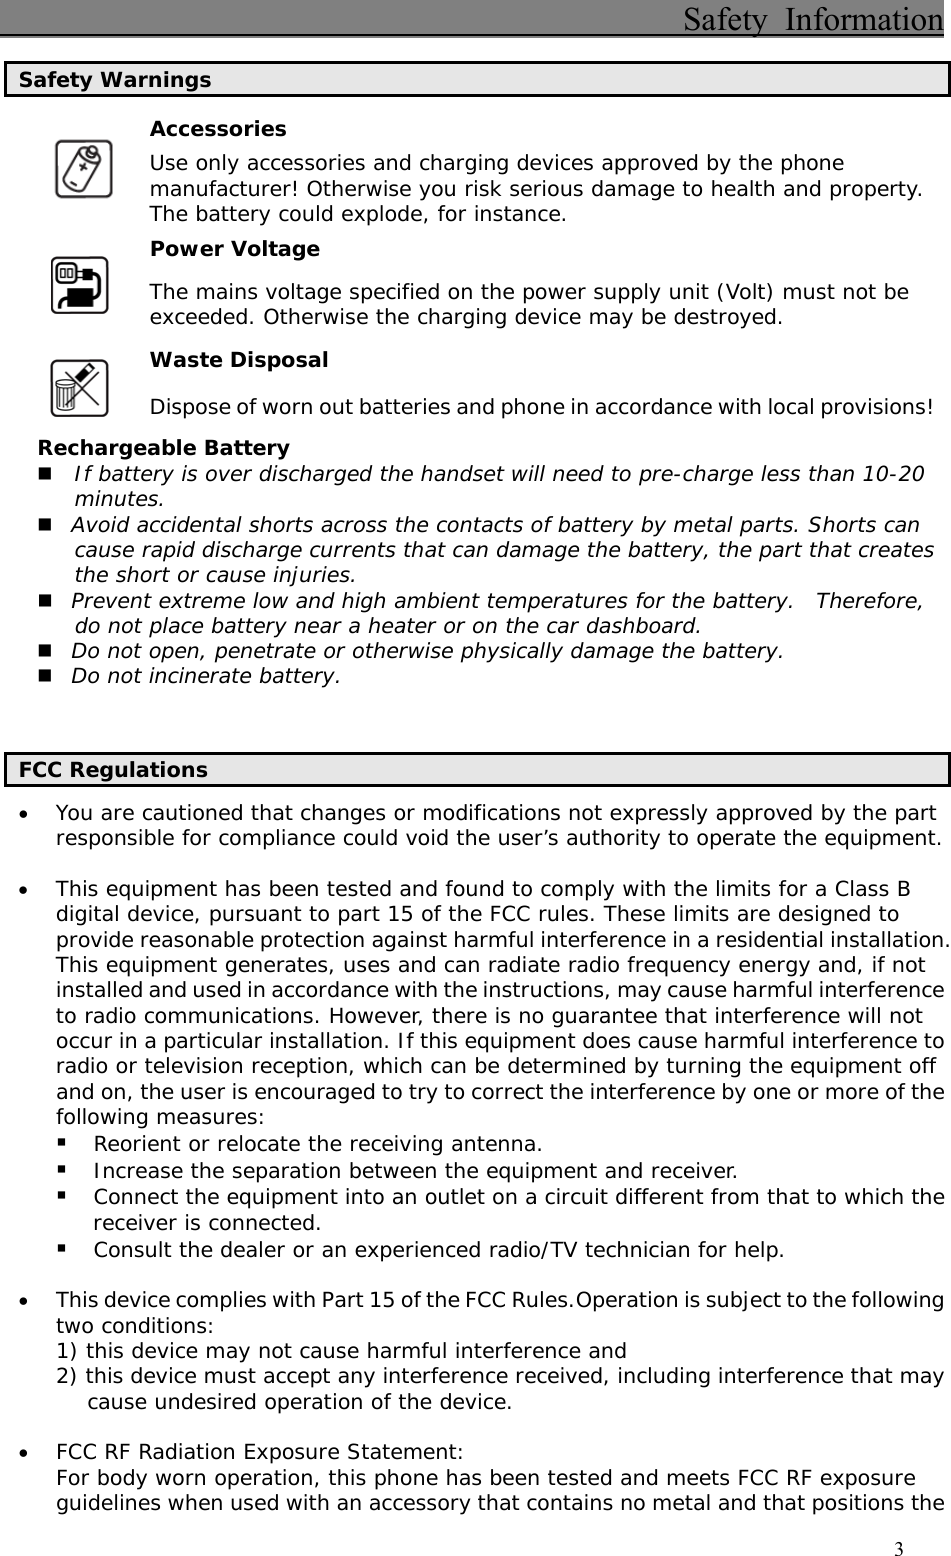                                          Safety Information                                    3 Safety Warnings Accessories  Use only accessories and charging devices approved by the phone manufacturer! Otherwise you risk serious damage to health and property. The battery could explode, for instance. Power Voltage  The mains voltage specified on the power supply unit (Volt) must not be exceeded. Otherwise the charging device may be destroyed. Waste Disposal  Dispose of worn out batteries and phone in accordance with local provisions! Rechargeable Battery  If battery is over discharged the handset will need to pre-charge less than 10-20 minutes.  Avoid accidental shorts across the contacts of battery by metal parts. Shorts can cause rapid discharge currents that can damage the battery, the part that creates the short or cause injuries.  Prevent extreme low and high ambient temperatures for the battery.  Therefore, do not place battery near a heater or on the car dashboard.  Do not open, penetrate or otherwise physically damage the battery.  Do not incinerate battery.   FCC Regulations • You are cautioned that changes or modifications not expressly approved by the part responsible for compliance could void the user’s authority to operate the equipment.  • This equipment has been tested and found to comply with the limits for a Class B digital device, pursuant to part 15 of the FCC rules. These limits are designed to provide reasonable protection against harmful interference in a residential installation. This equipment generates, uses and can radiate radio frequency energy and, if not installed and used in accordance with the instructions, may cause harmful interference to radio communications. However, there is no guarantee that interference will not occur in a particular installation. If this equipment does cause harmful interference to radio or television reception, which can be determined by turning the equipment off and on, the user is encouraged to try to correct the interference by one or more of the following measures:  Reorient or relocate the receiving antenna.  Increase the separation between the equipment and receiver.  Connect the equipment into an outlet on a circuit different from that to which the receiver is connected.  Consult the dealer or an experienced radio/TV technician for help.  • This device complies with Part 15 of the FCC Rules.Operation is subject to the following two conditions: 1) this device may not cause harmful interference and 2) this device must accept any interference received, including interference that may cause undesired operation of the device.  • FCC RF Radiation Exposure Statement: For body worn operation, this phone has been tested and meets FCC RF exposure guidelines when used with an accessory that contains no metal and that positions the 